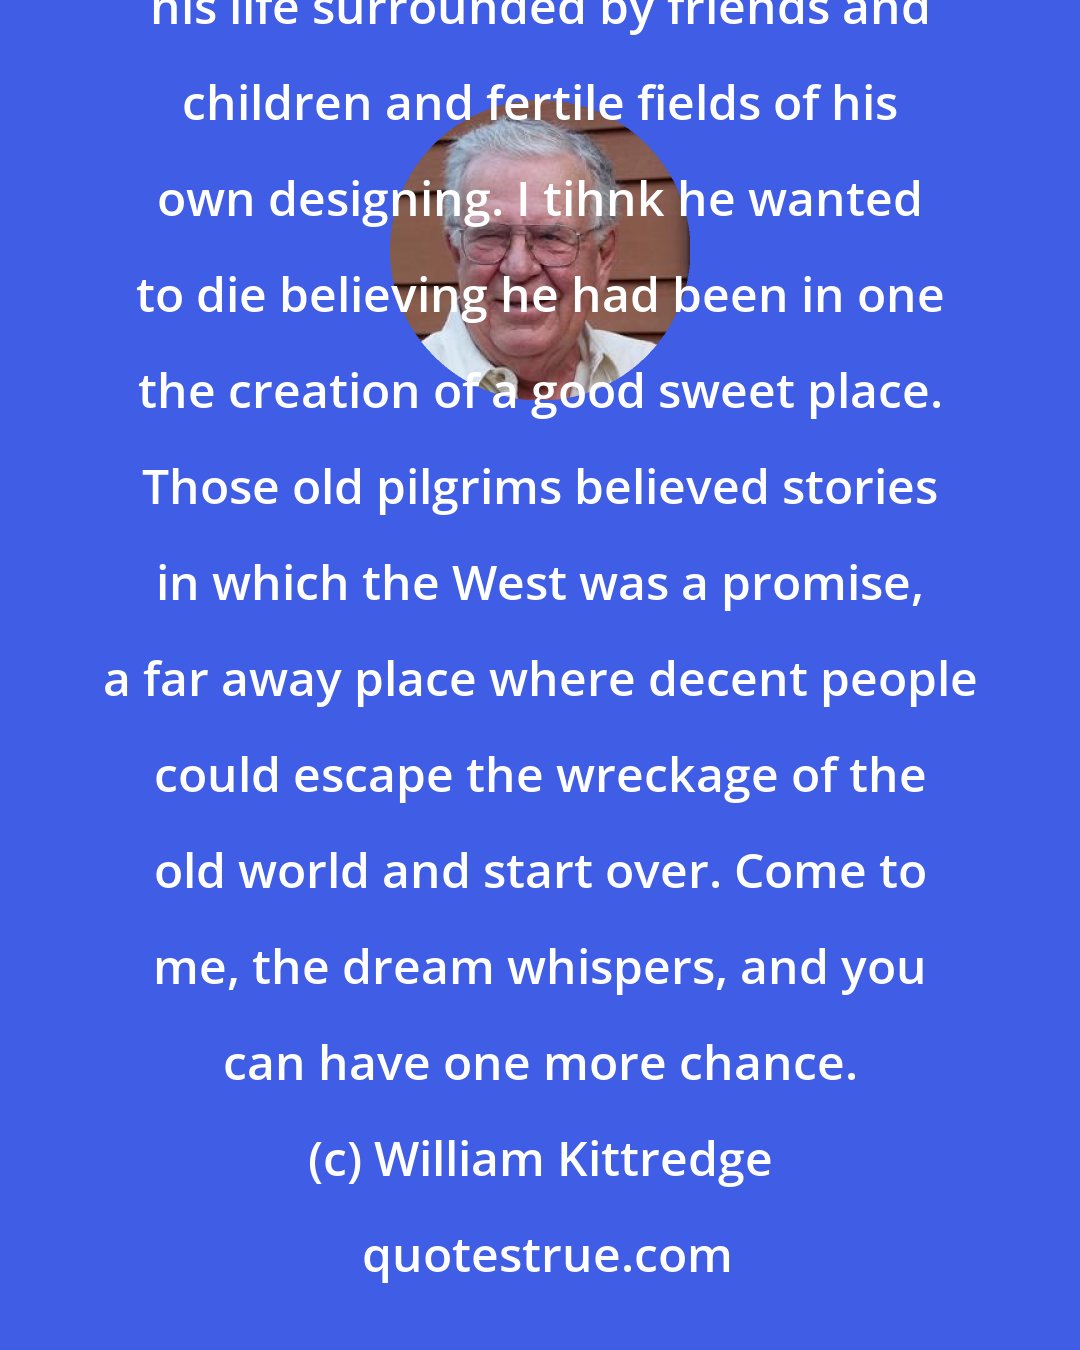 William Kittredge: I wonder what my father saw in his most secret sight of the right life. It's my guess he wanted to live out his life surrounded by friends and children and fertile fields of his own designing. I tihnk he wanted to die believing he had been in one the creation of a good sweet place. Those old pilgrims believed stories in which the West was a promise, a far away place where decent people could escape the wreckage of the old world and start over. Come to me, the dream whispers, and you can have one more chance.